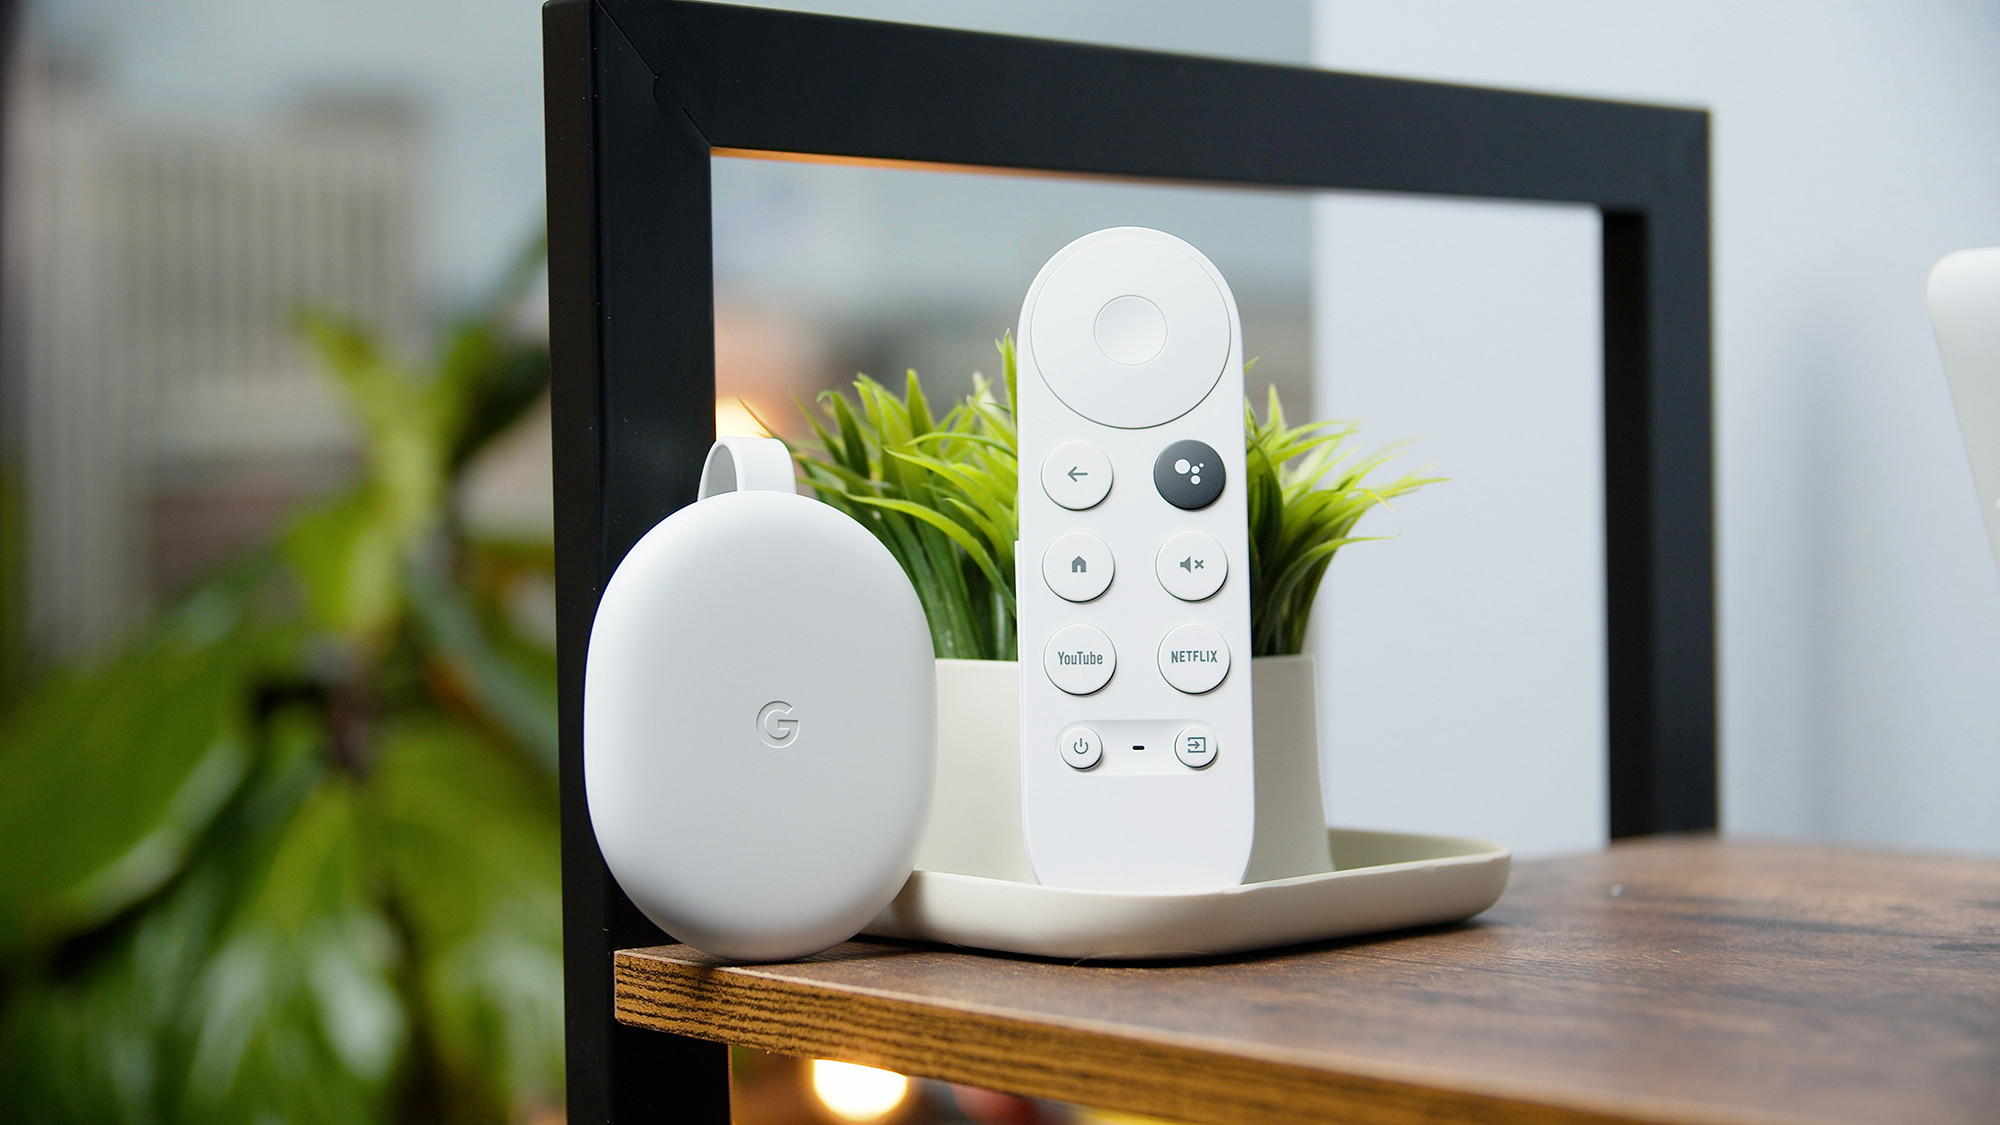 suffix skål Monopol How to connect your Chromecast to a hotel TV | Digital Trends